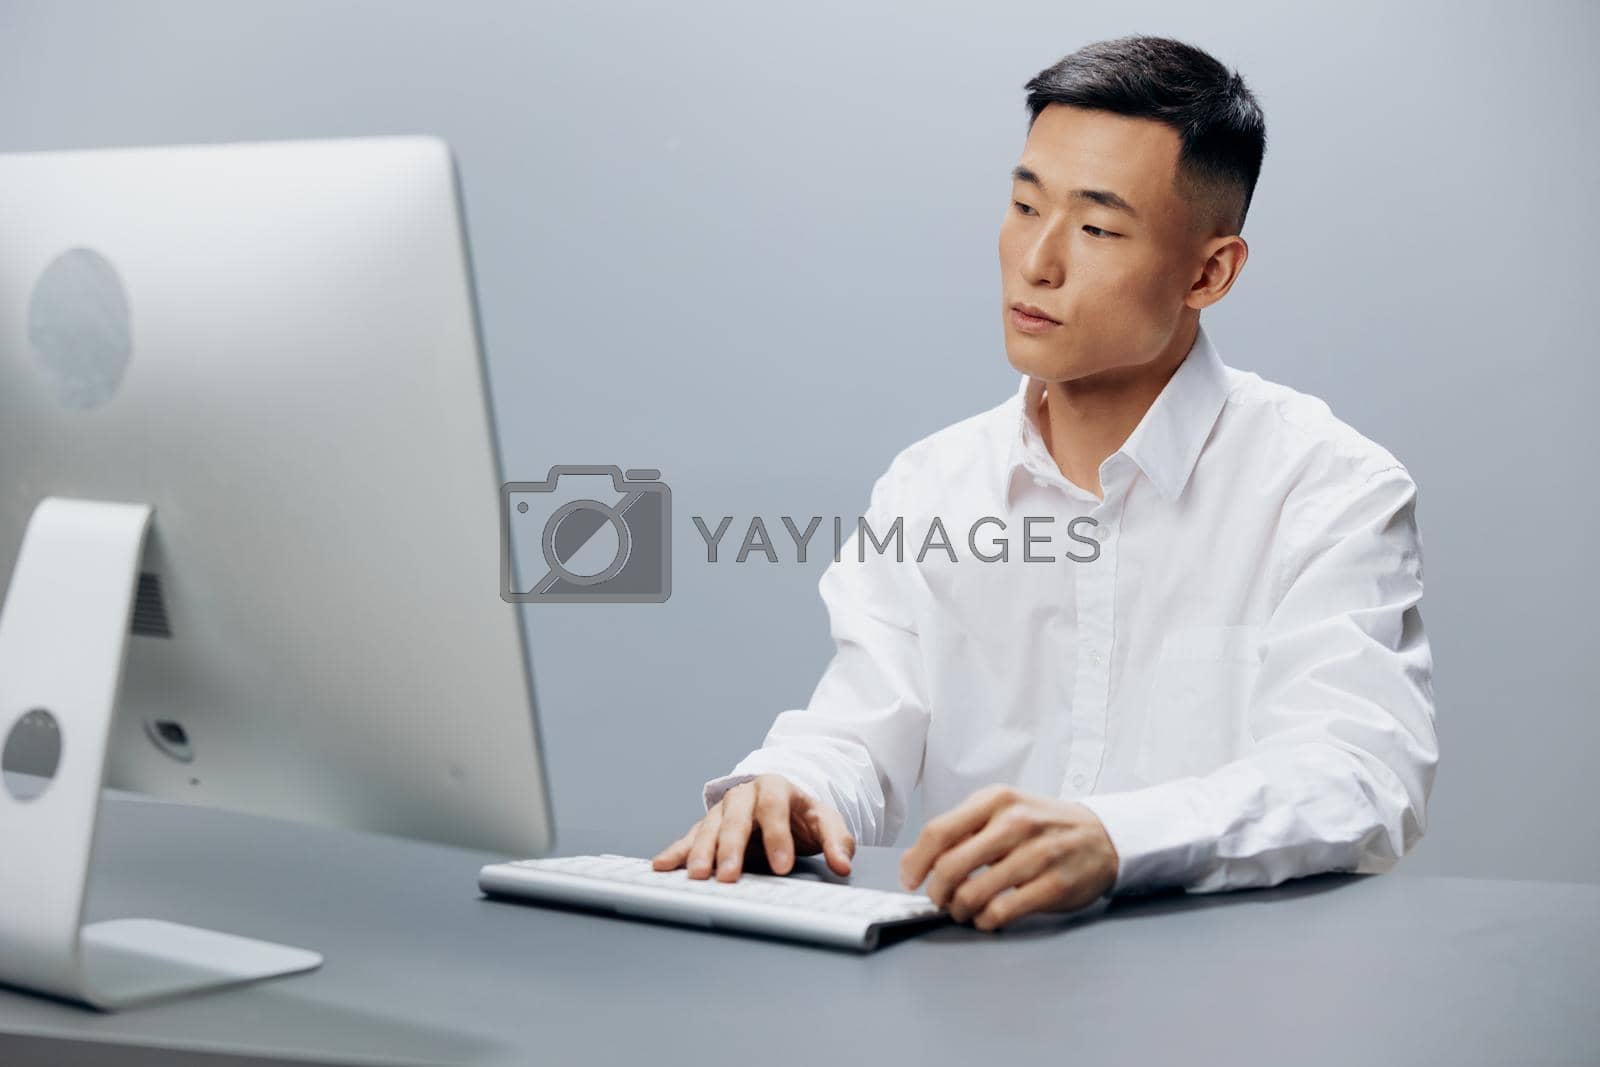 Royalty free image of manager sits at a computer in the office with a keyboard technologies by SHOTPRIME